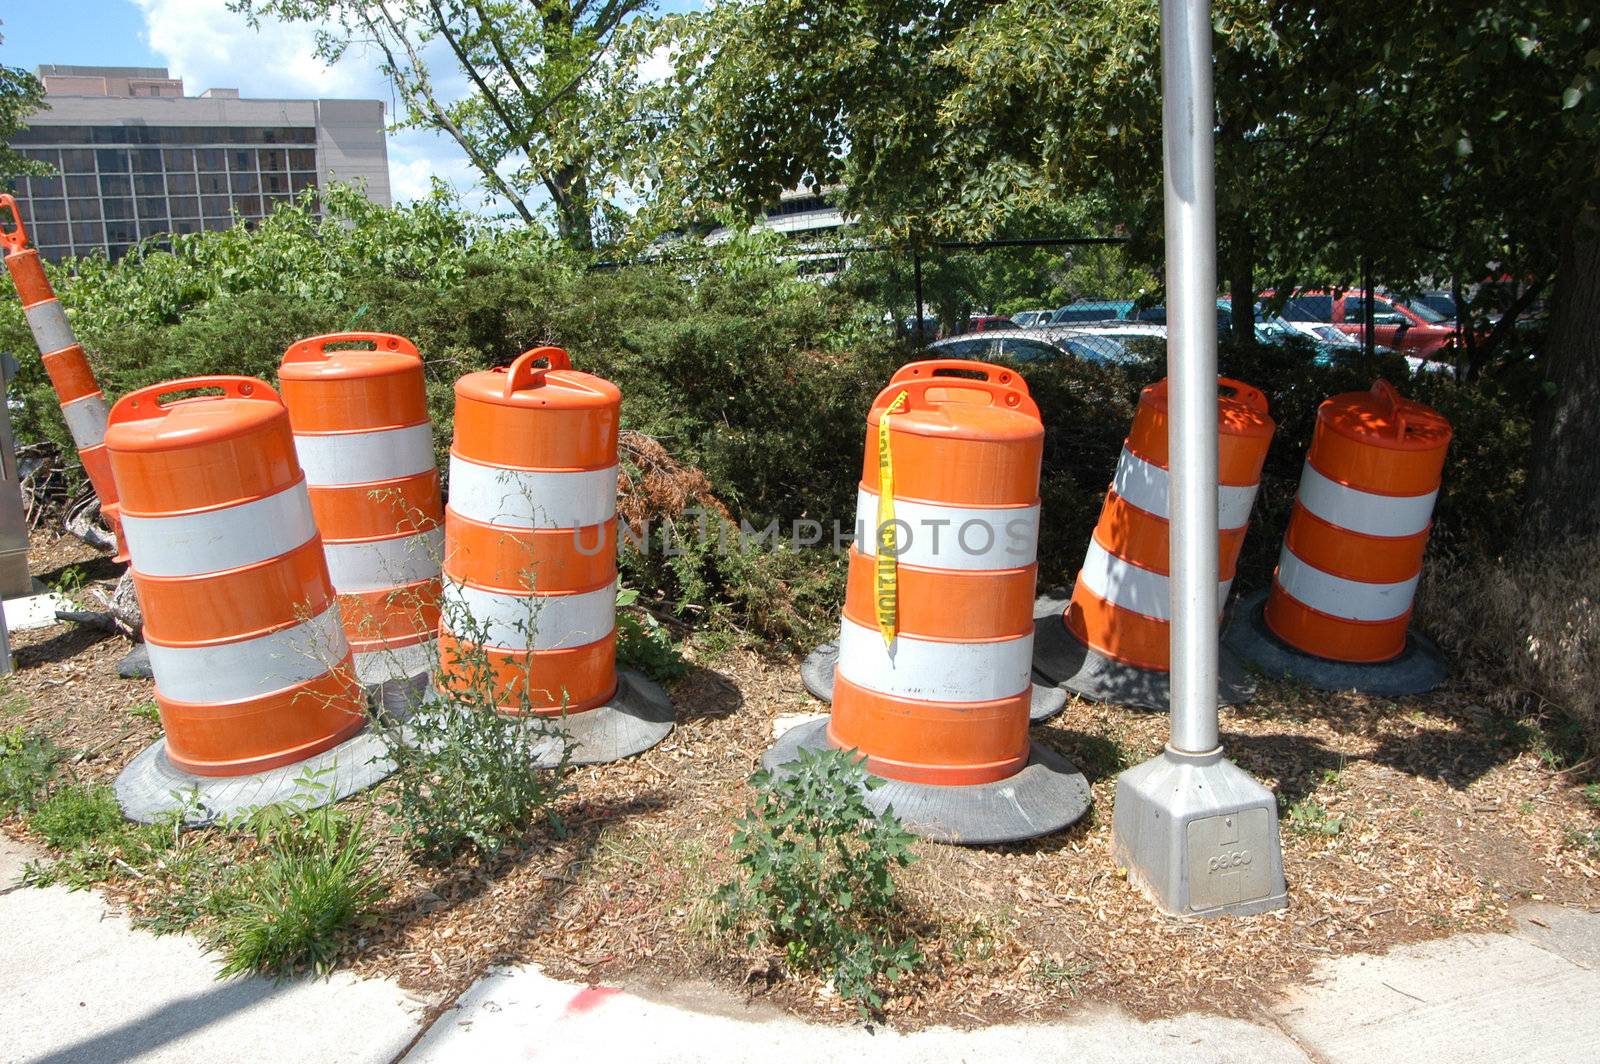 Orange and white traffic barrels ready for use in the city